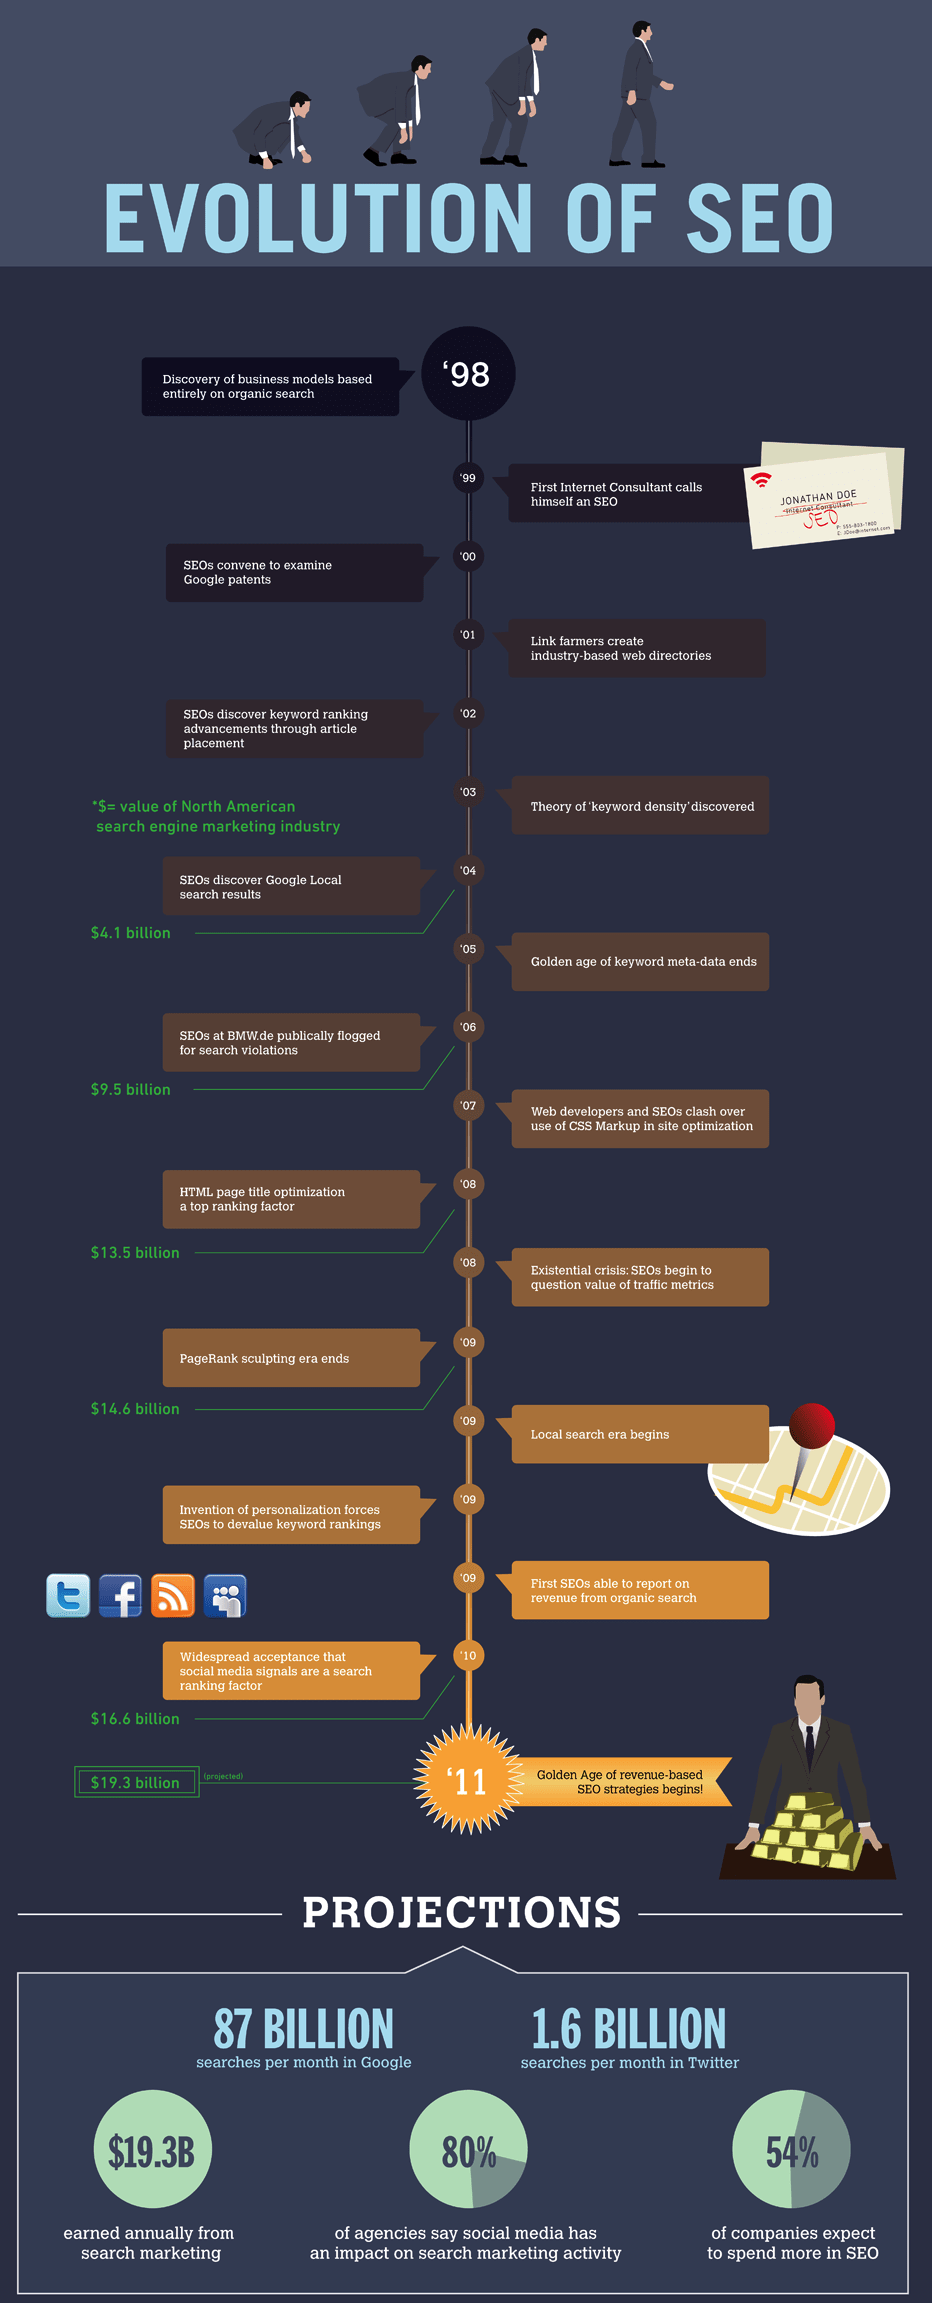 The Evolution of SEO Over the Years